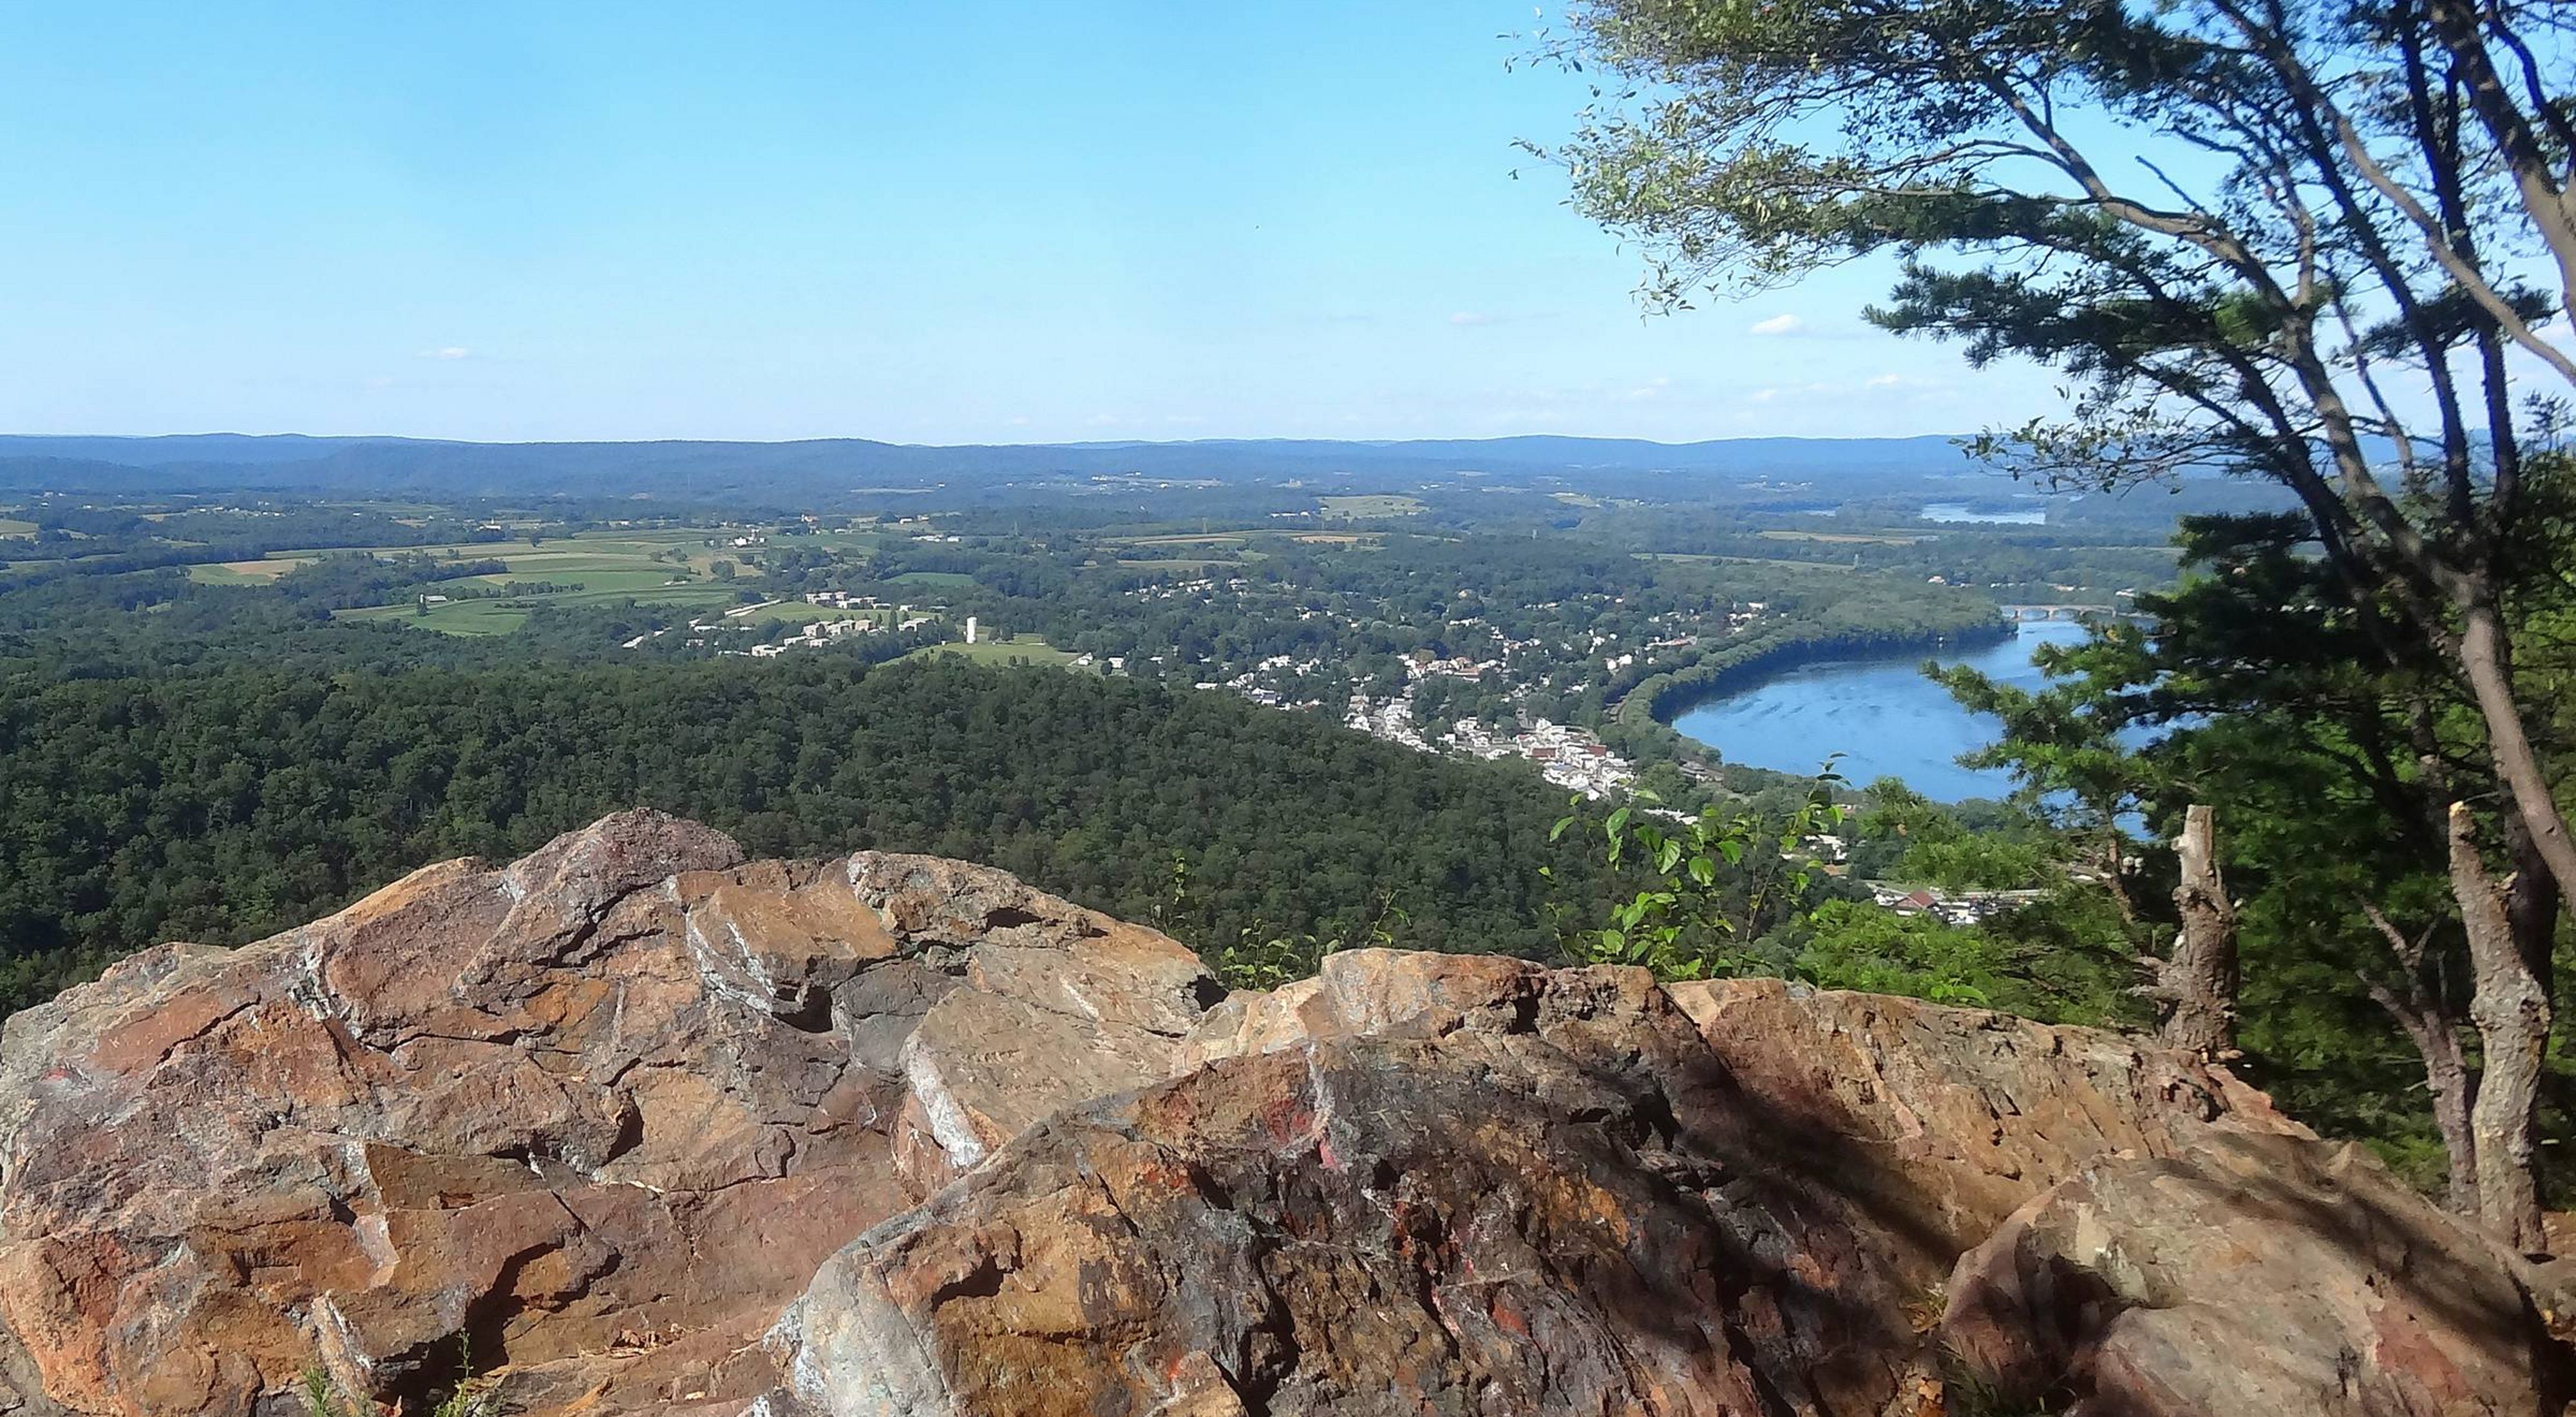 A view of a lookout over a large rock over looking a forested area and small river.